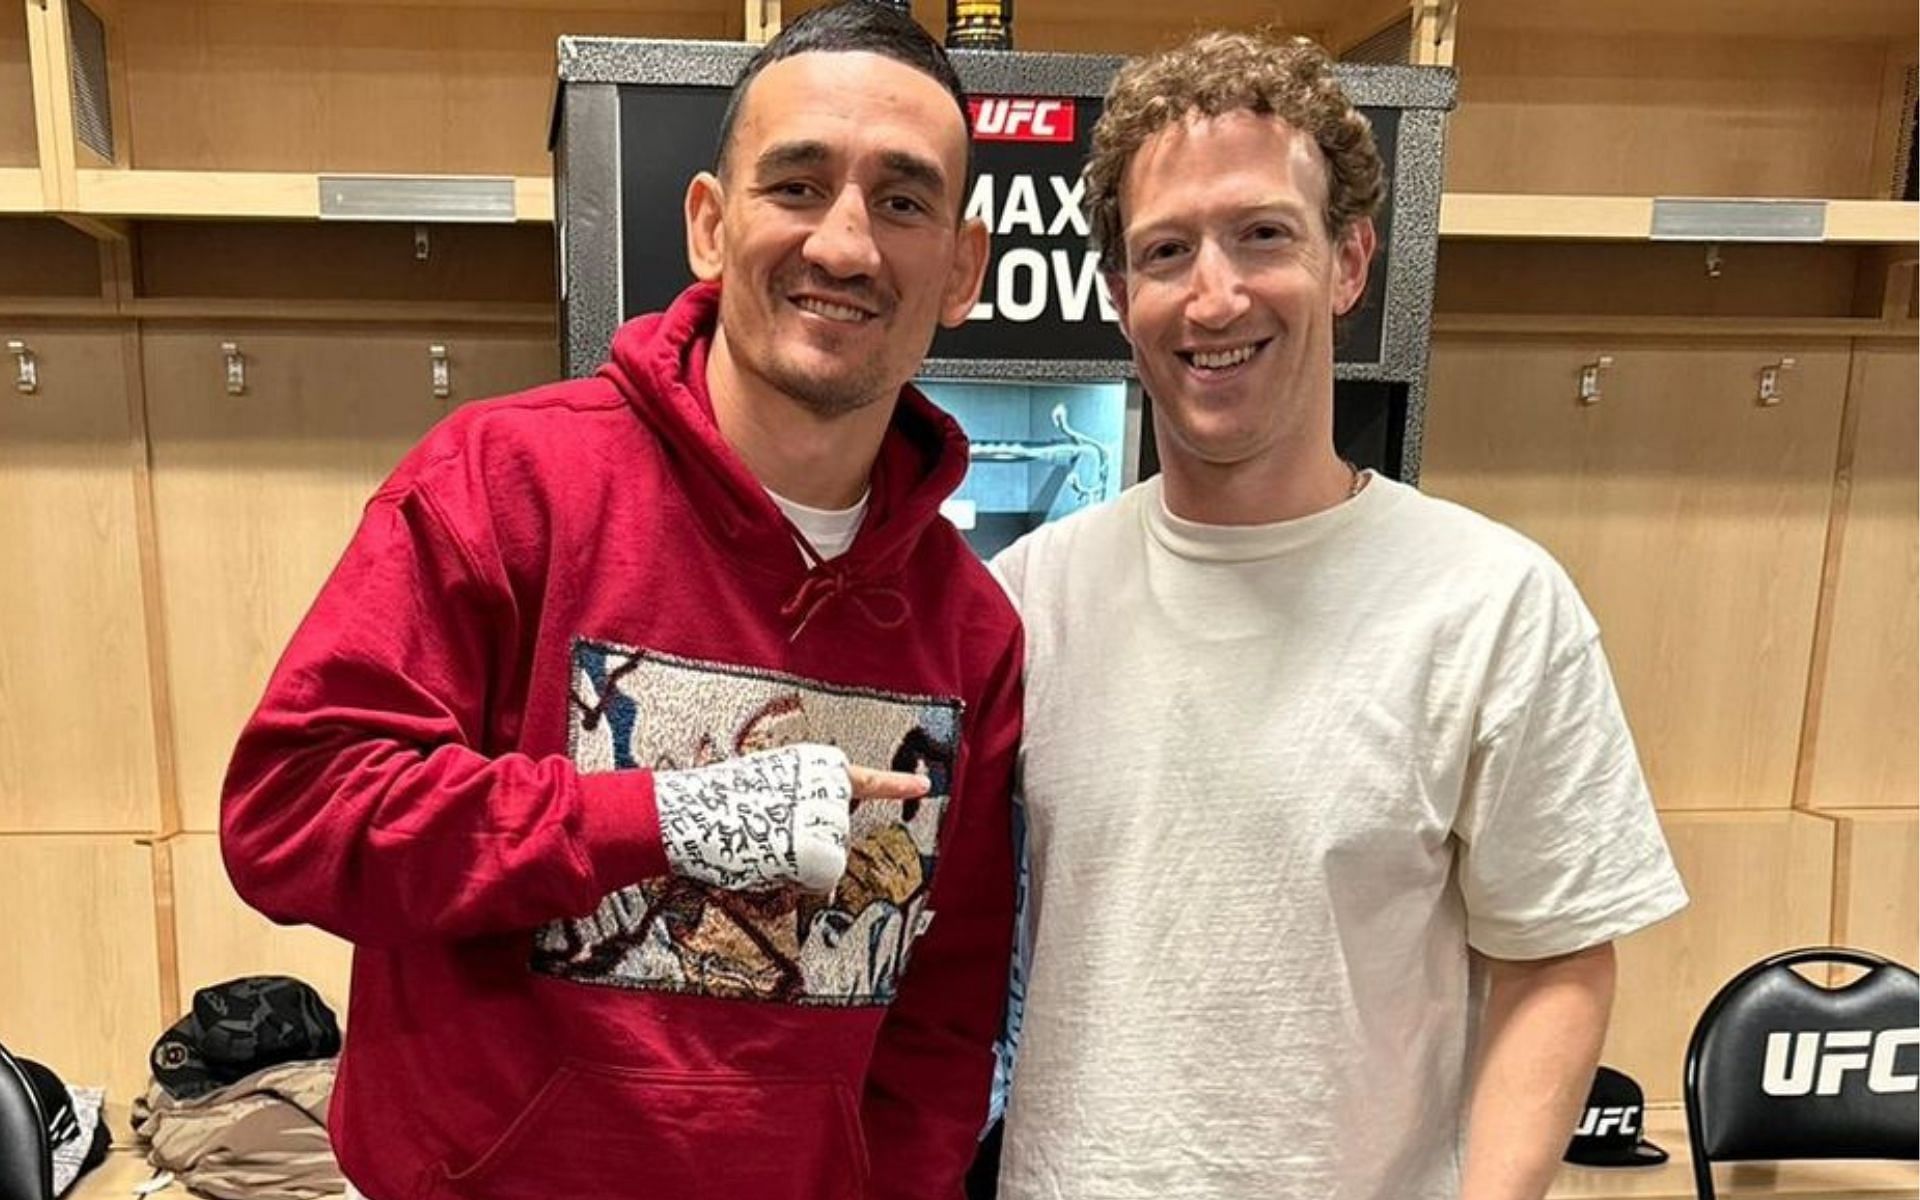 Max Holloway (left) gifted latest Meta glasses by Mark Zuckerberg (right) [Image courtesy @zuck on Instagram] 